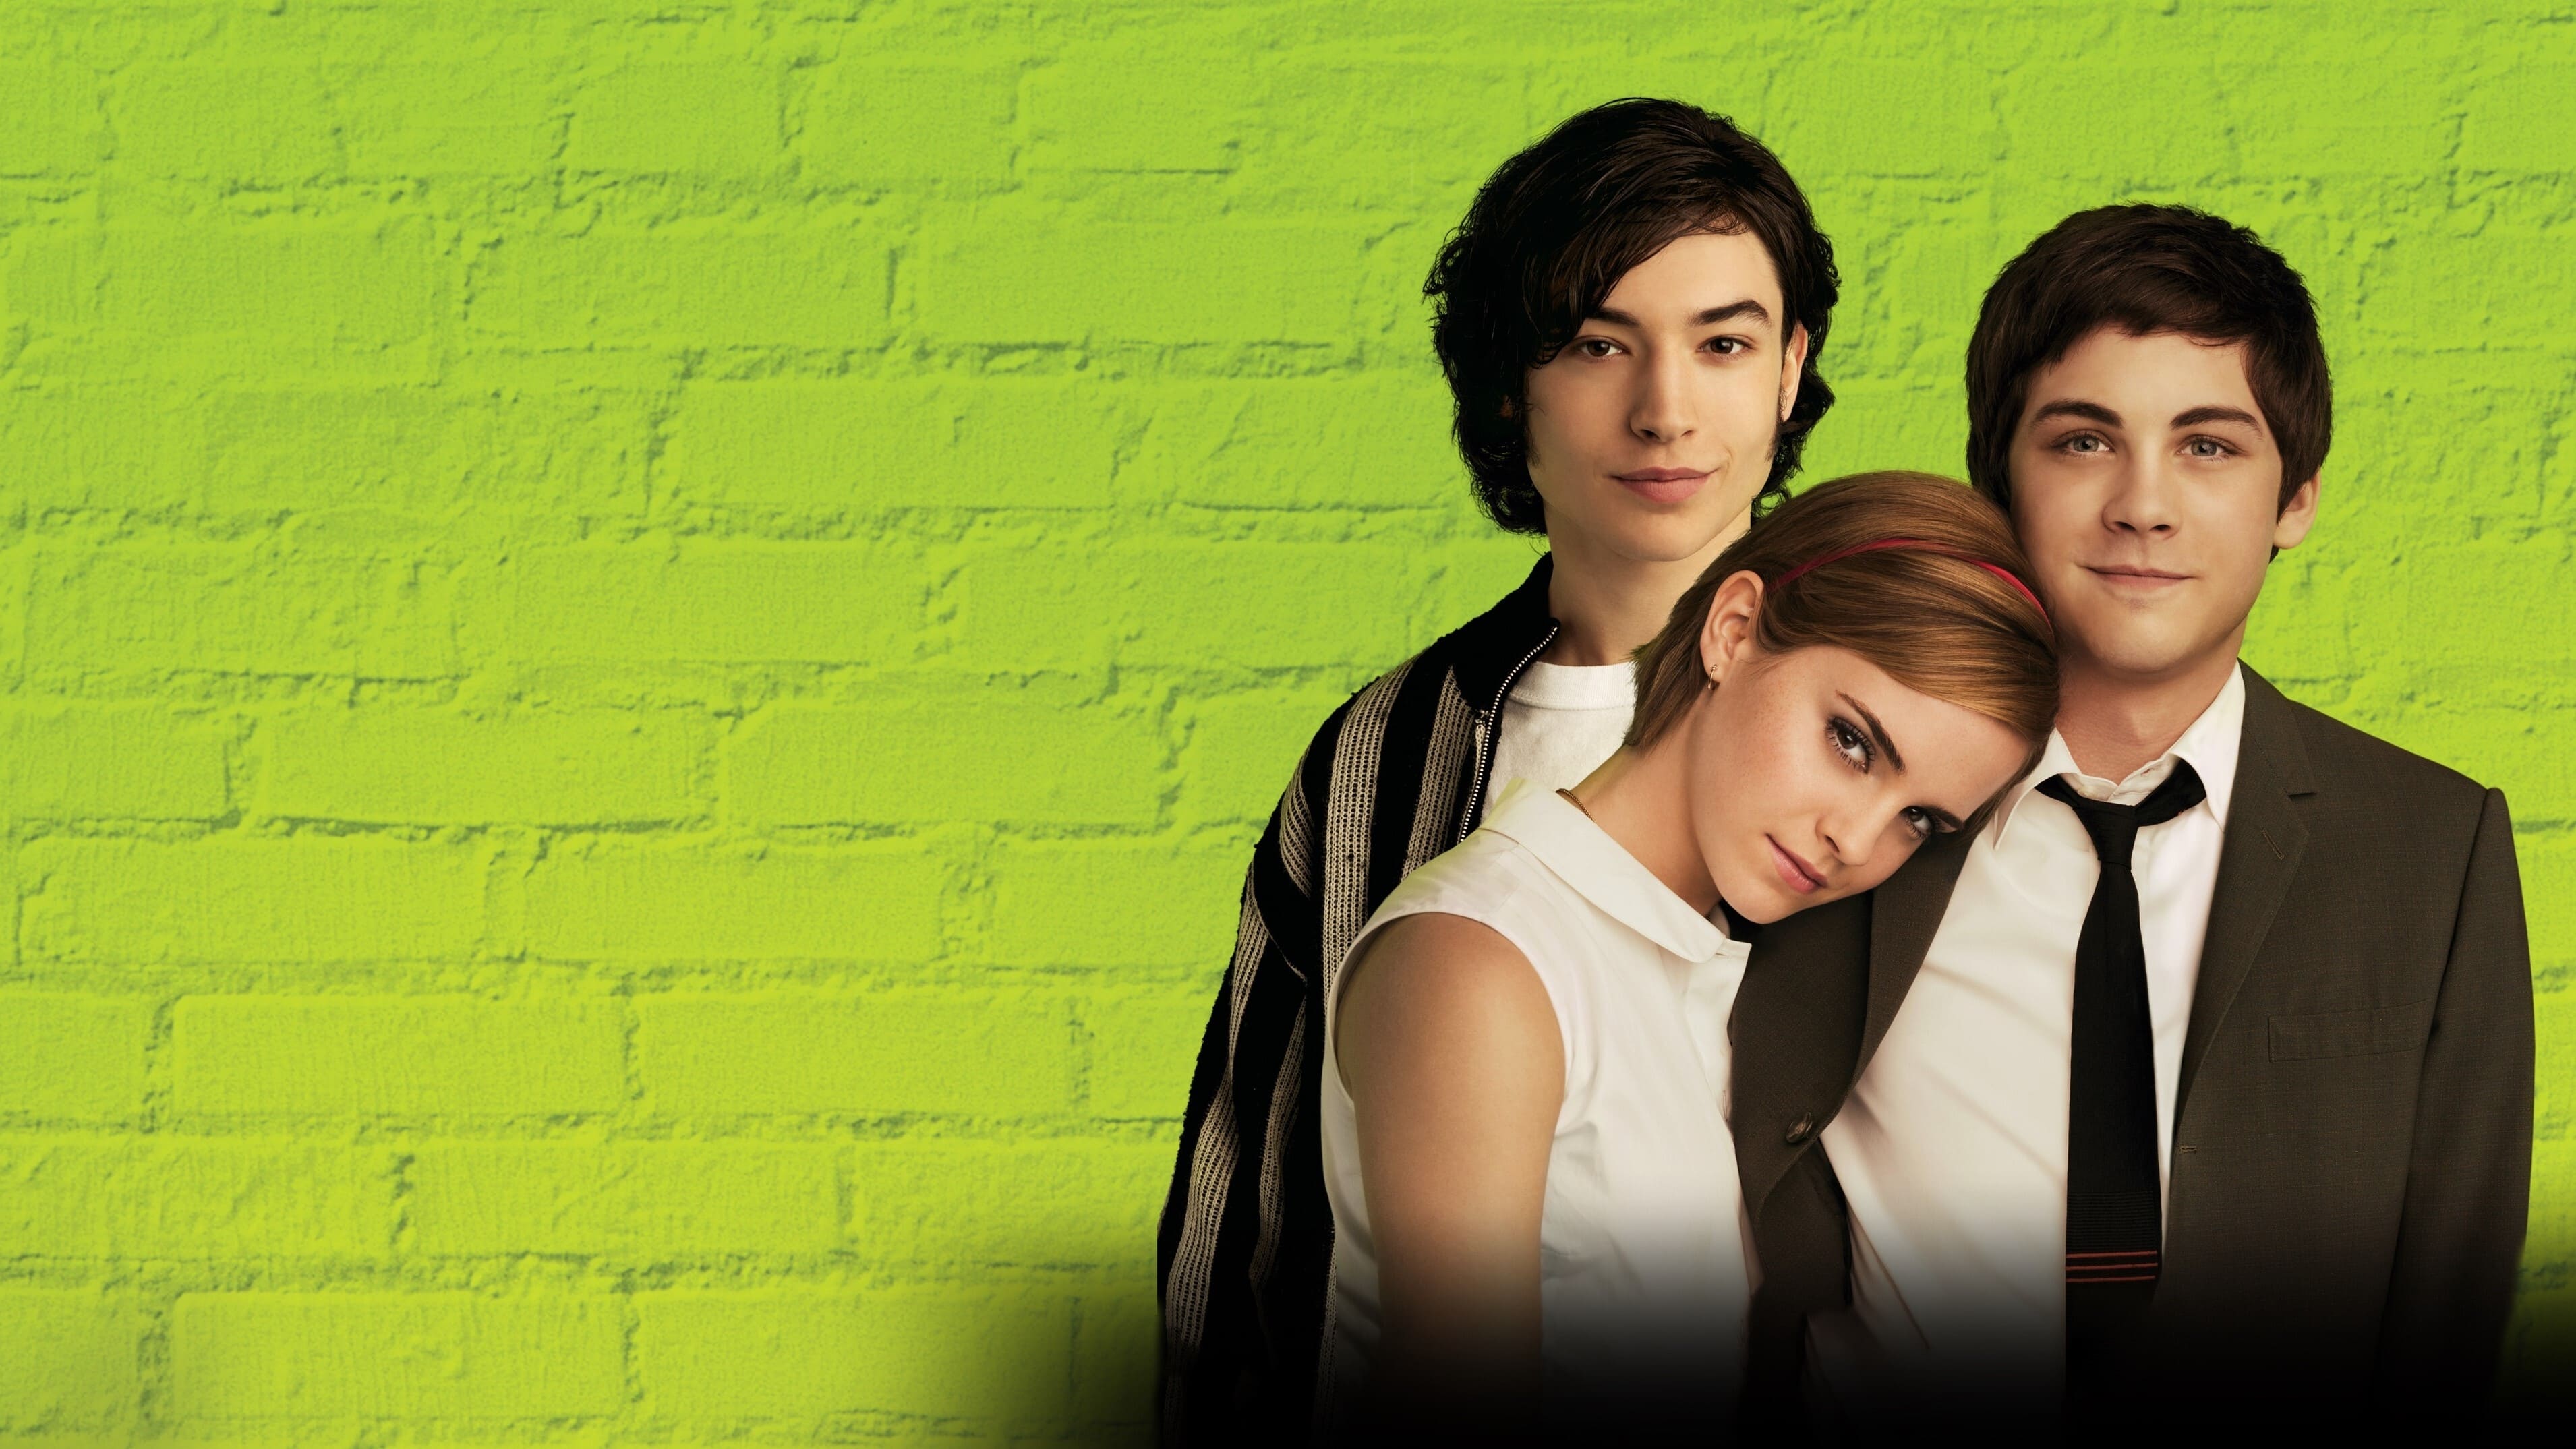 the perks of being a wallflower full movie subtitulada torrent